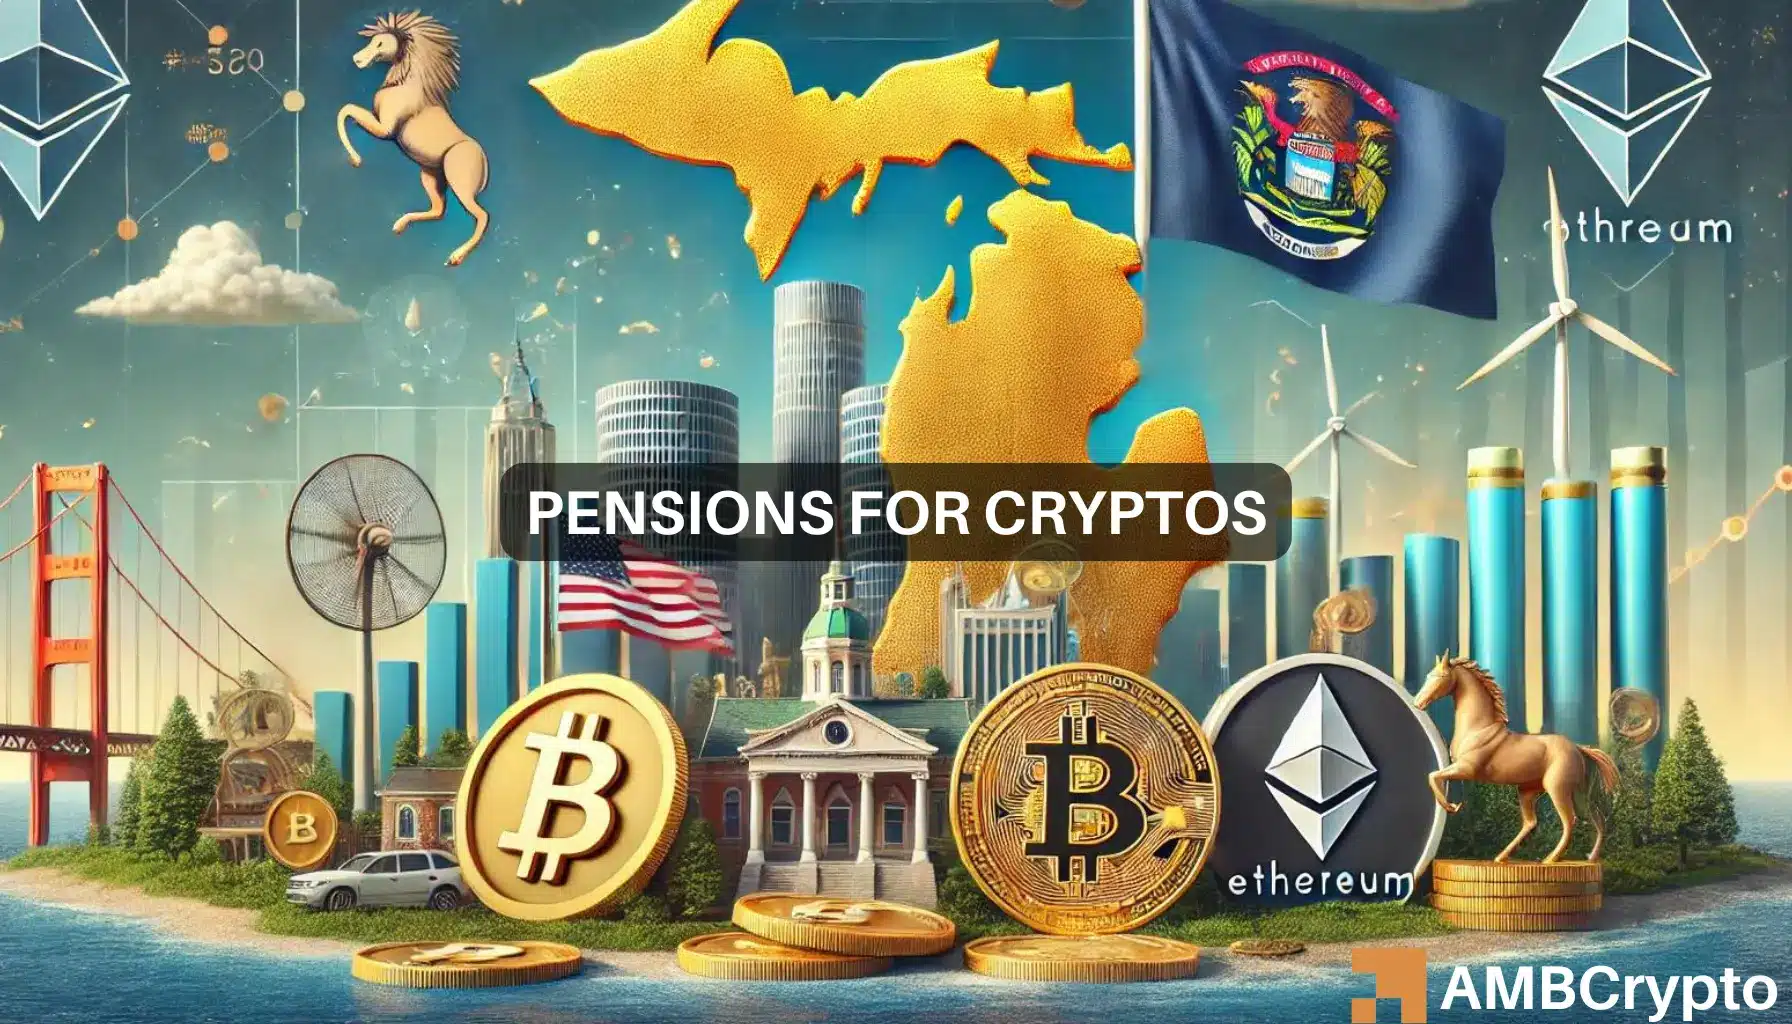 Why THIS pension fund’s $6.6M investment in Bitcoin ETFs is important